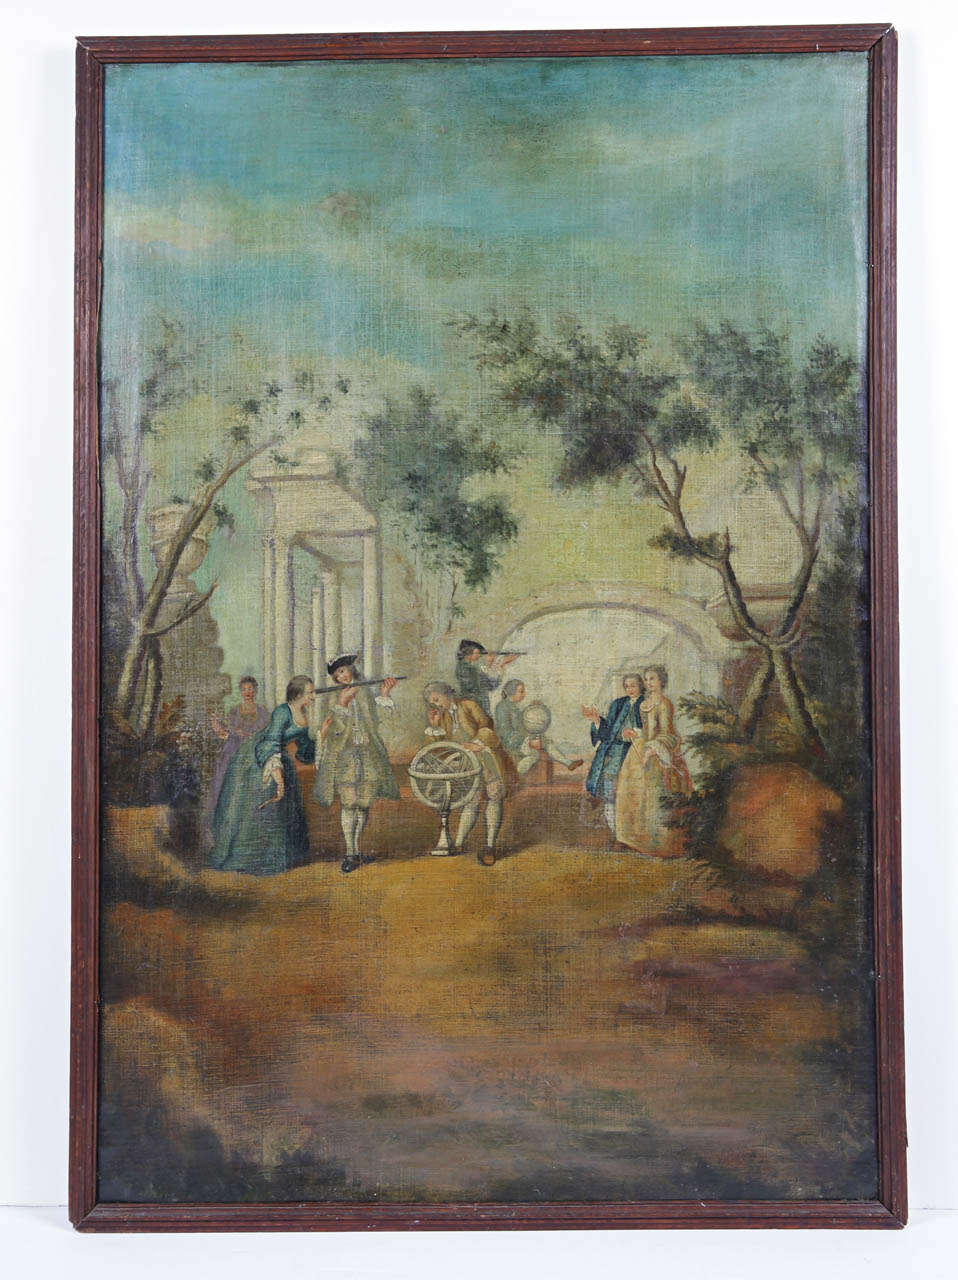 These 18th century French paintings are sometimes referred to as Landscape Garden Paintings.  Historically they were designed to be allegories and were rarely copied from real nature.  Often, they depicted romantic scenes in Arcadian landscapes